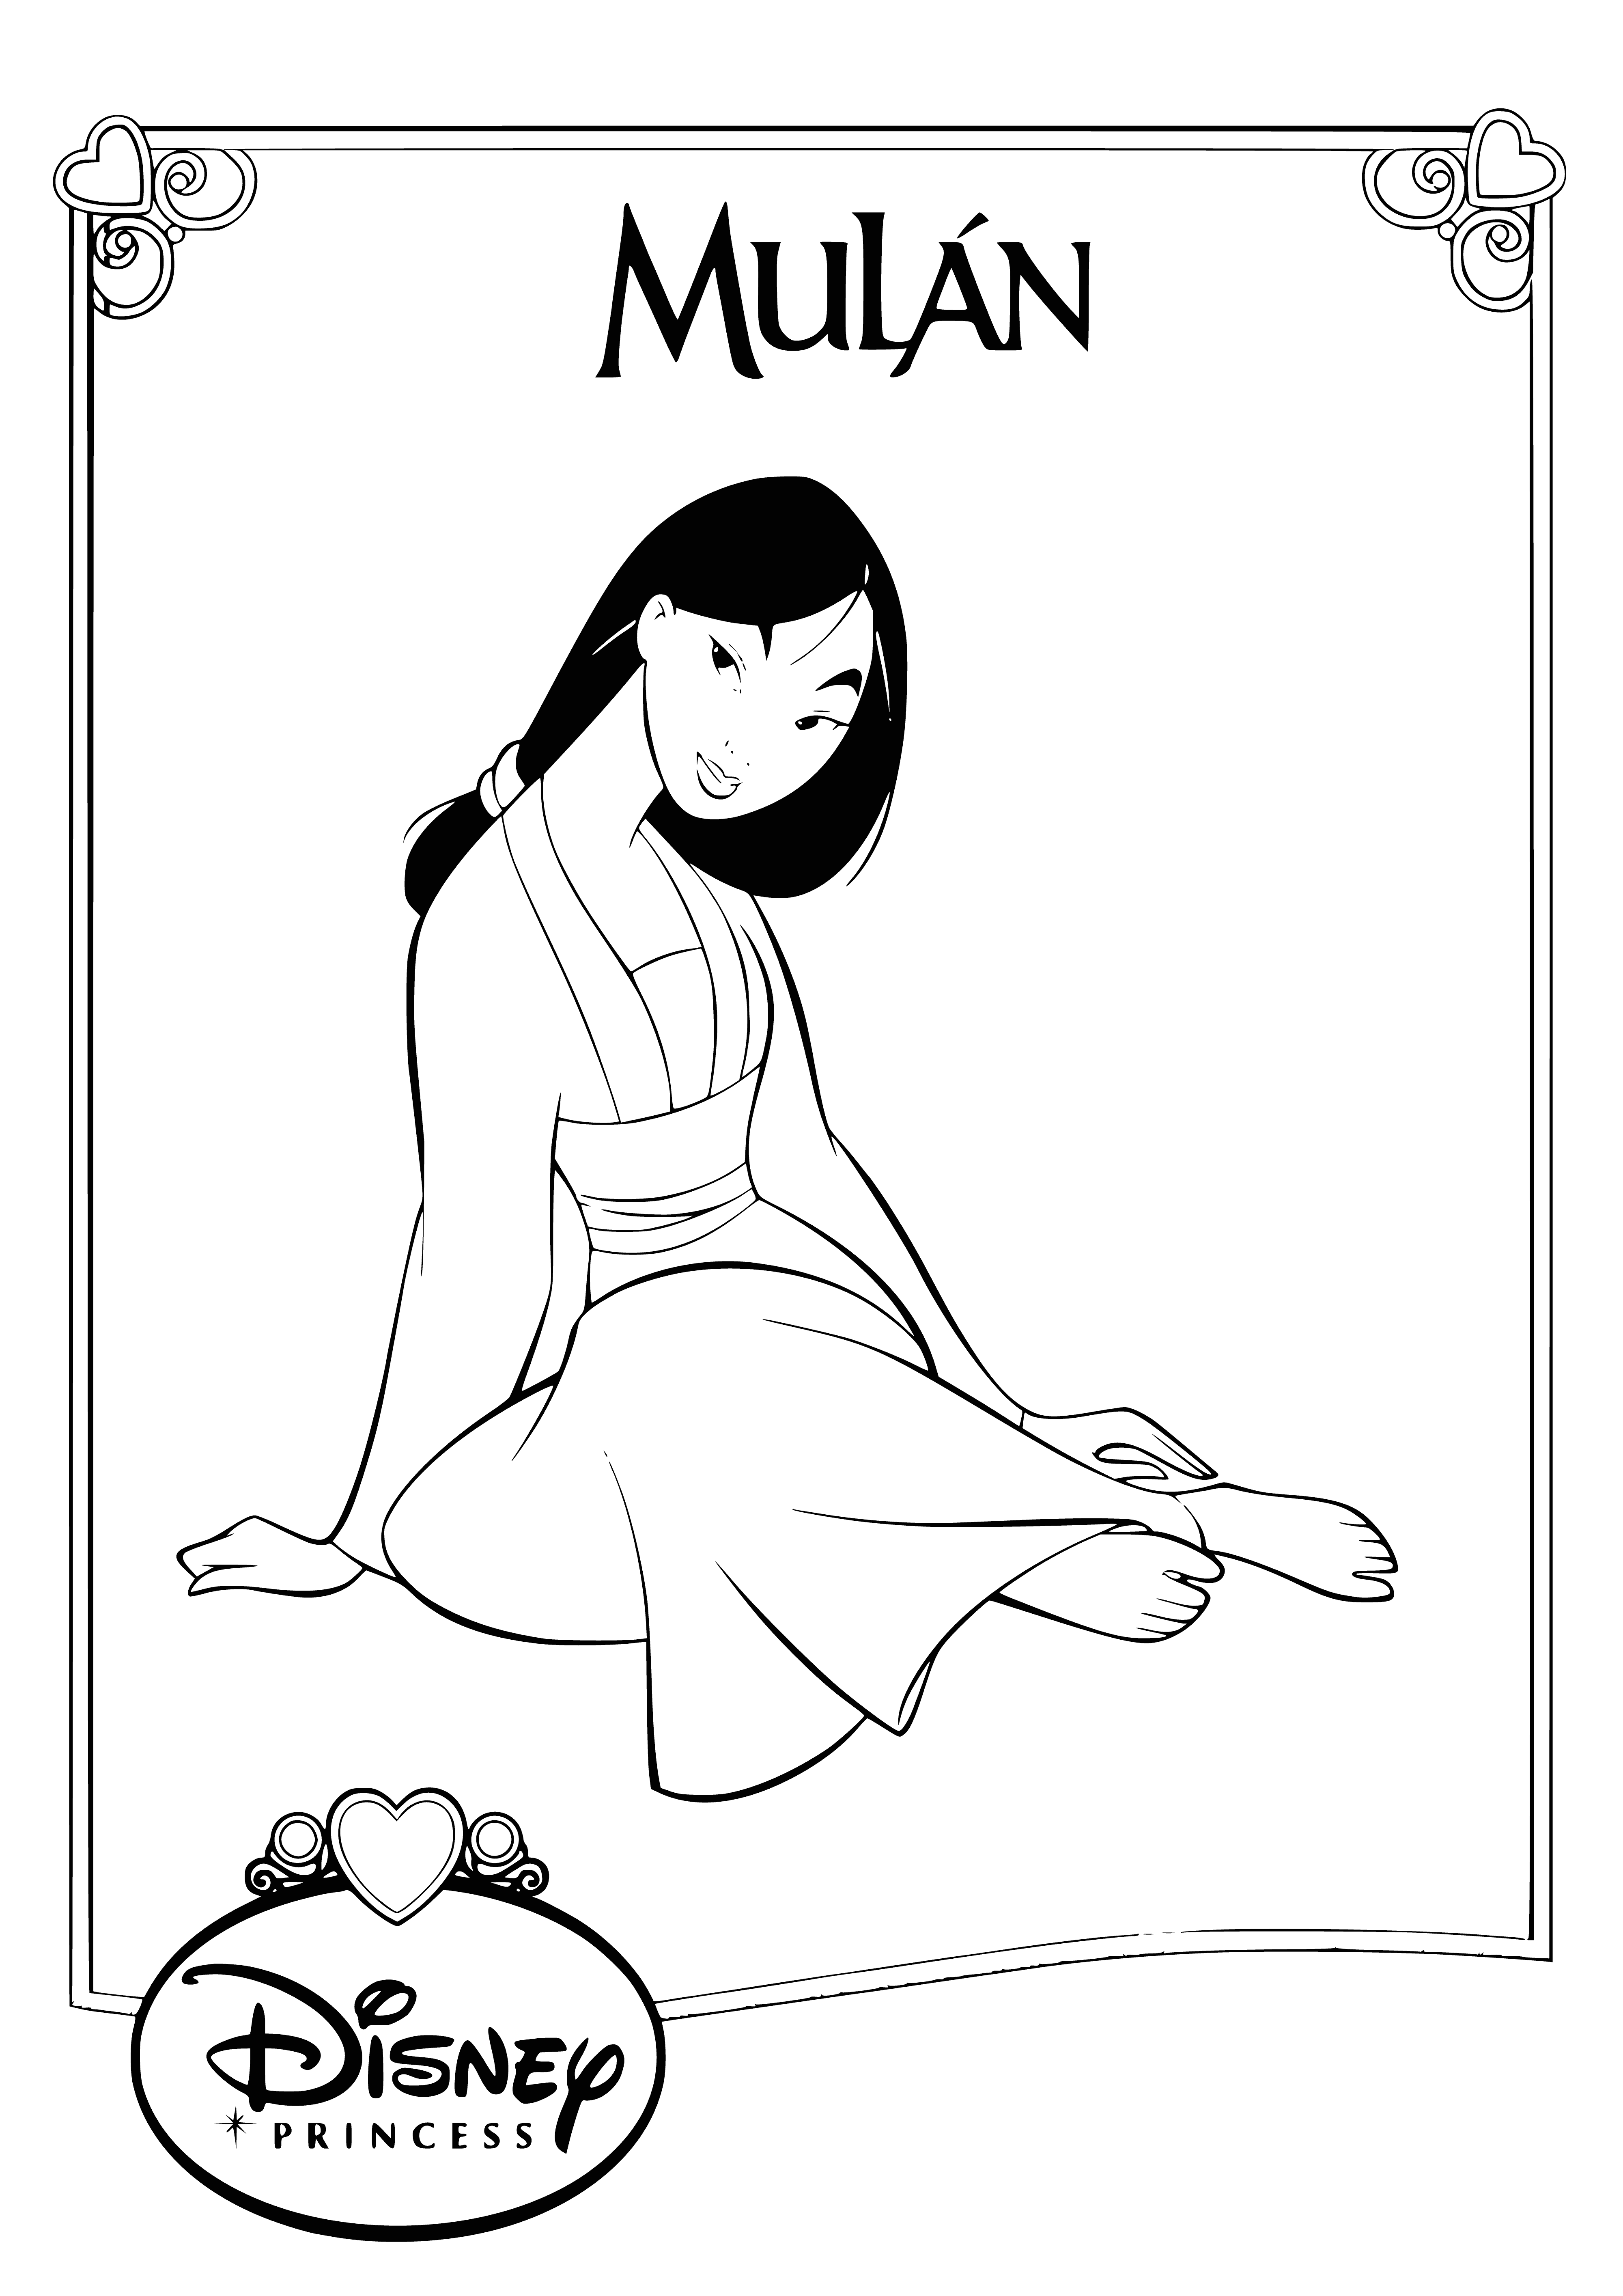 coloring page: Beautiful young woman w/long black hair, wearing Chinese dress & red sash while holding sword, gaze determined.